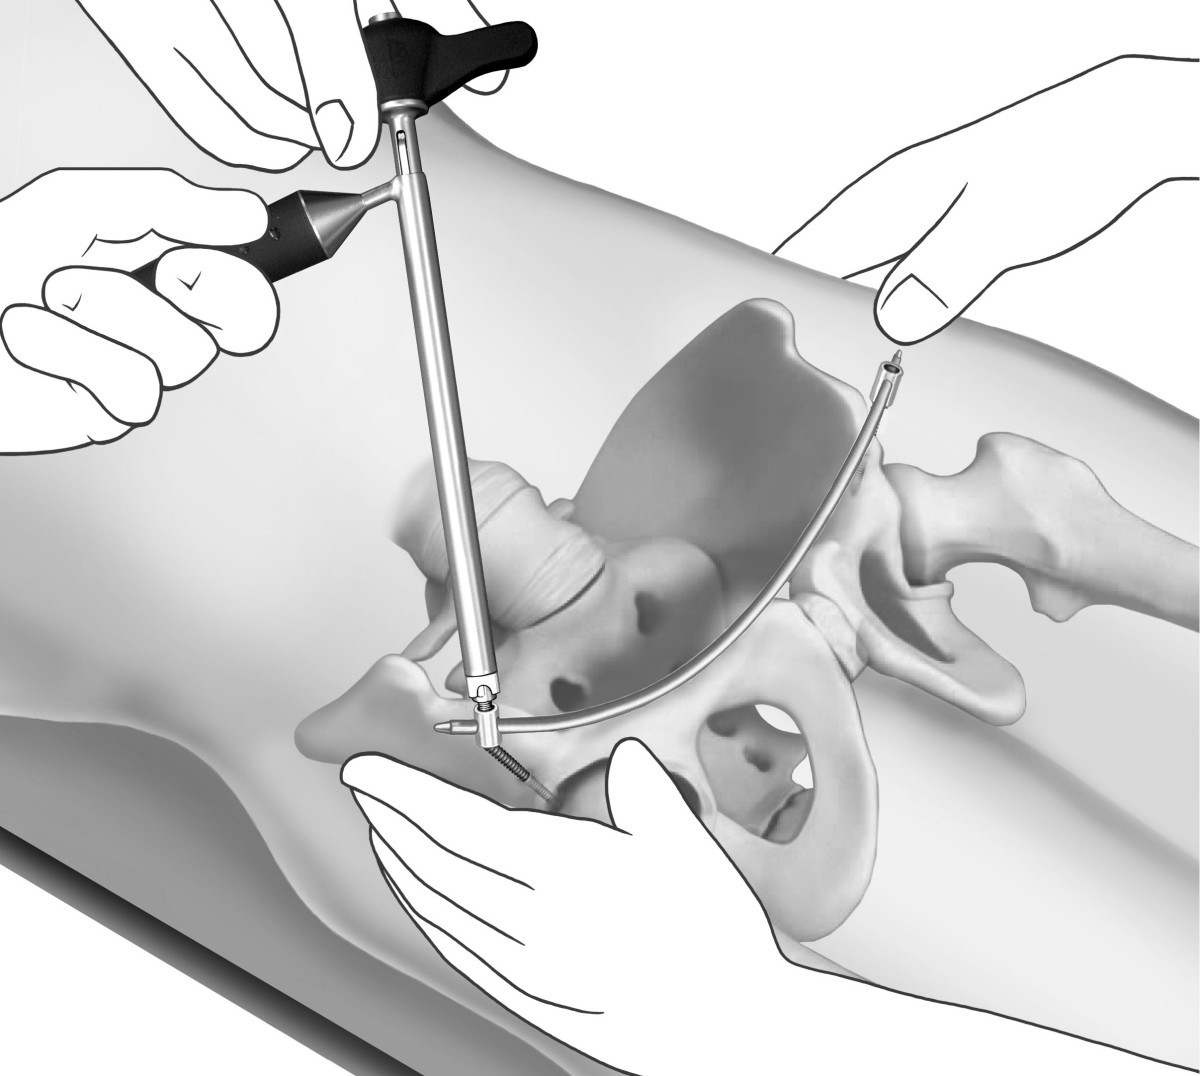 Minimally invasive internal fixation for unstable pelvic ring fractures: a  retrospective study of 27 cases | Journal of Orthopaedic Surgery and  Research | Full Text